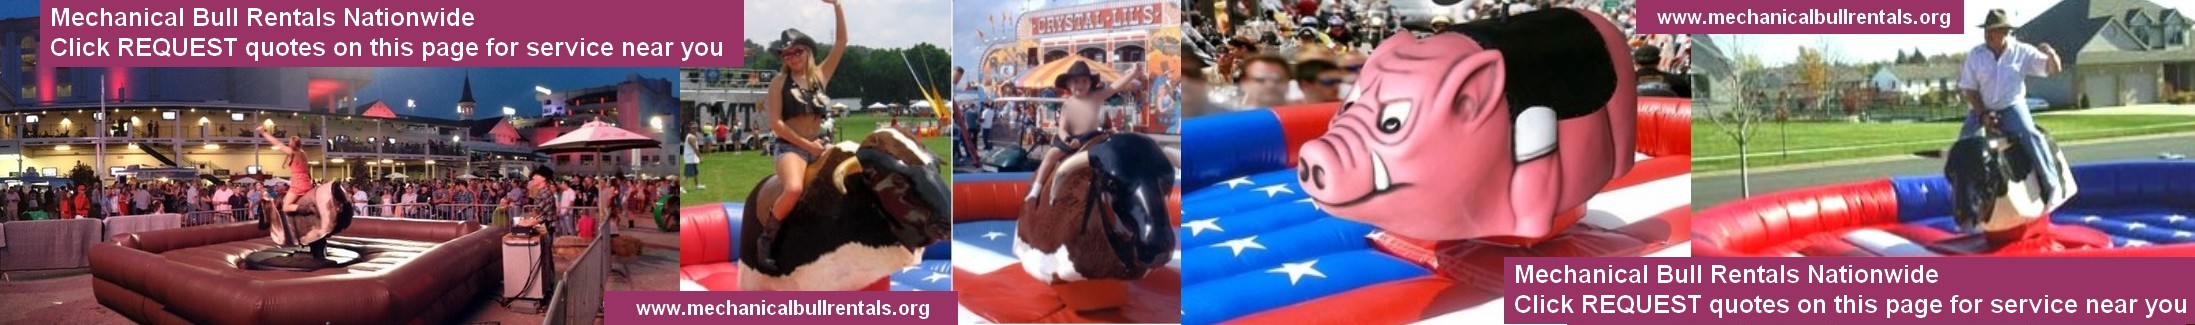 Mechanical Bull Rentals Fort Pierce Florida FL and near you. Free referrals to local mechanical bull companies LOGO